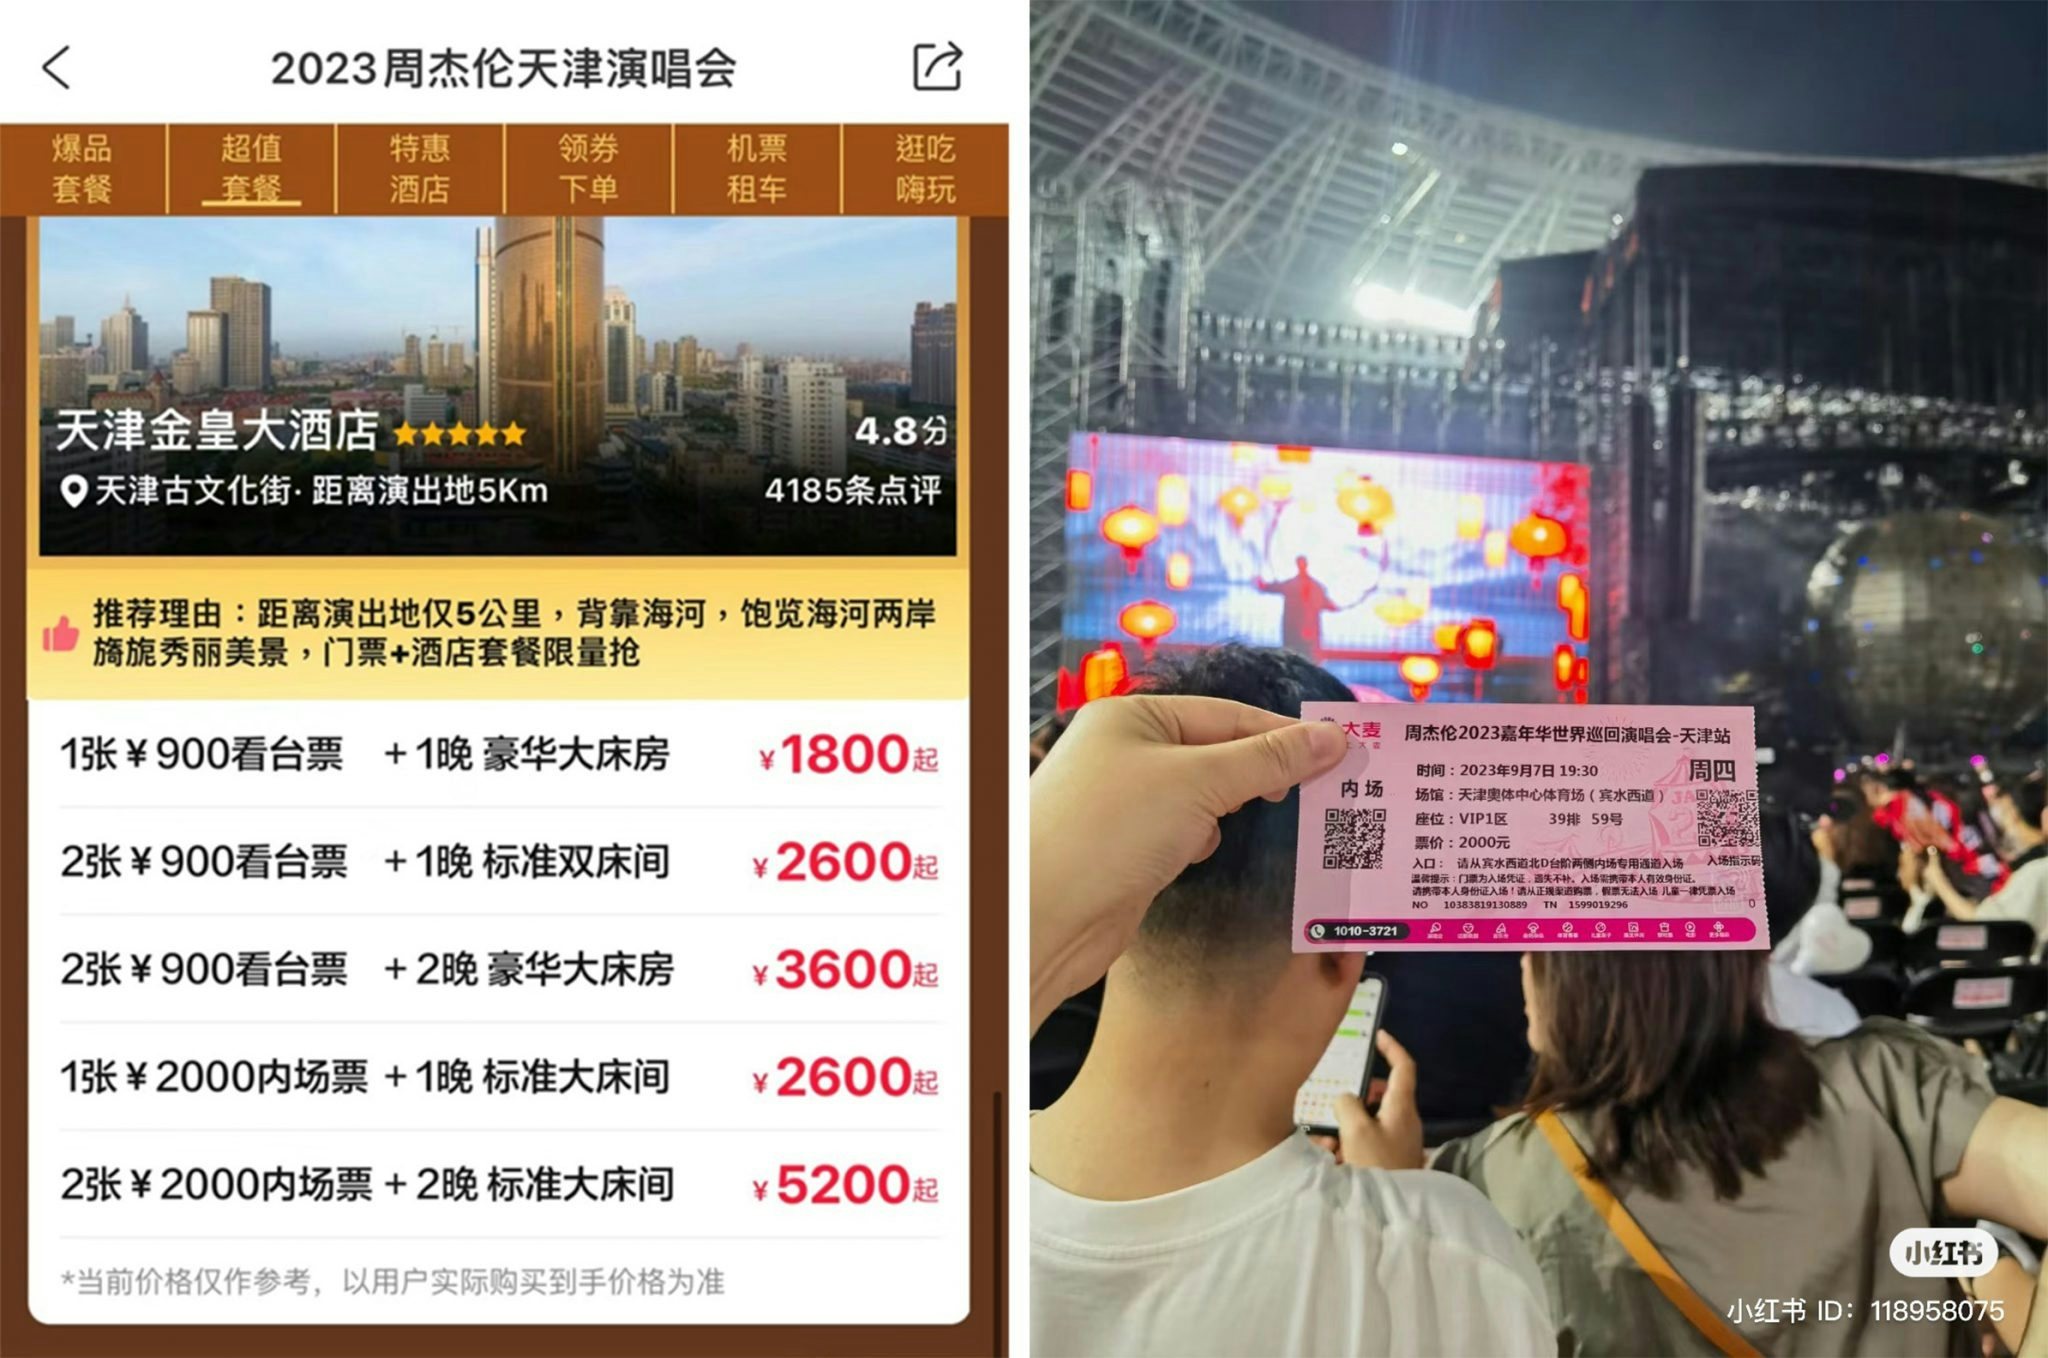 Jay Chou fans could purchase packages that included concert tickets and hotel accommodation through Trip.com. Photo: Xiaohongshu